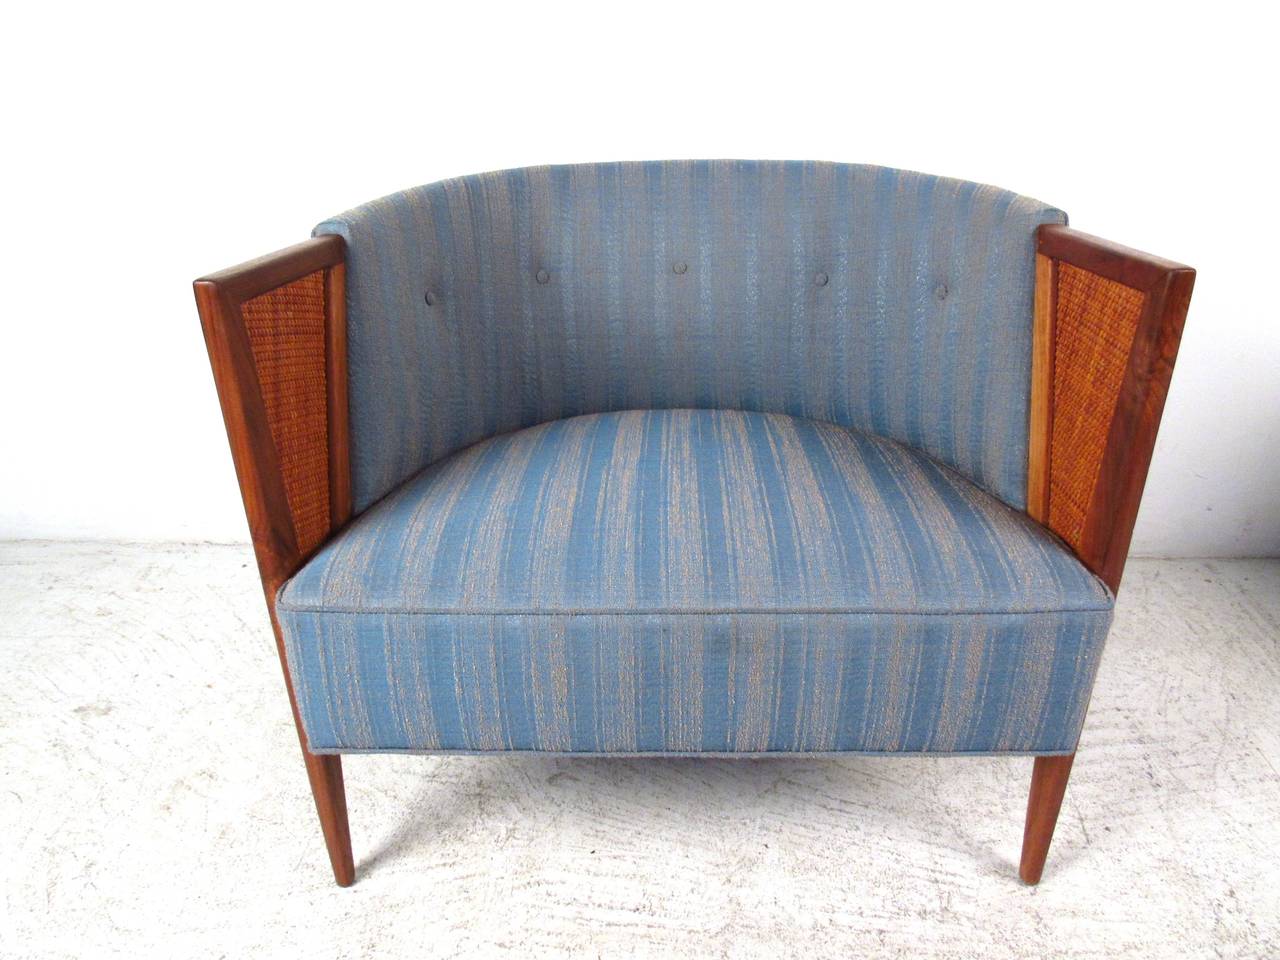 Upholstery Pair of Mid-Century Modern Barrel Back Lounge Chairs